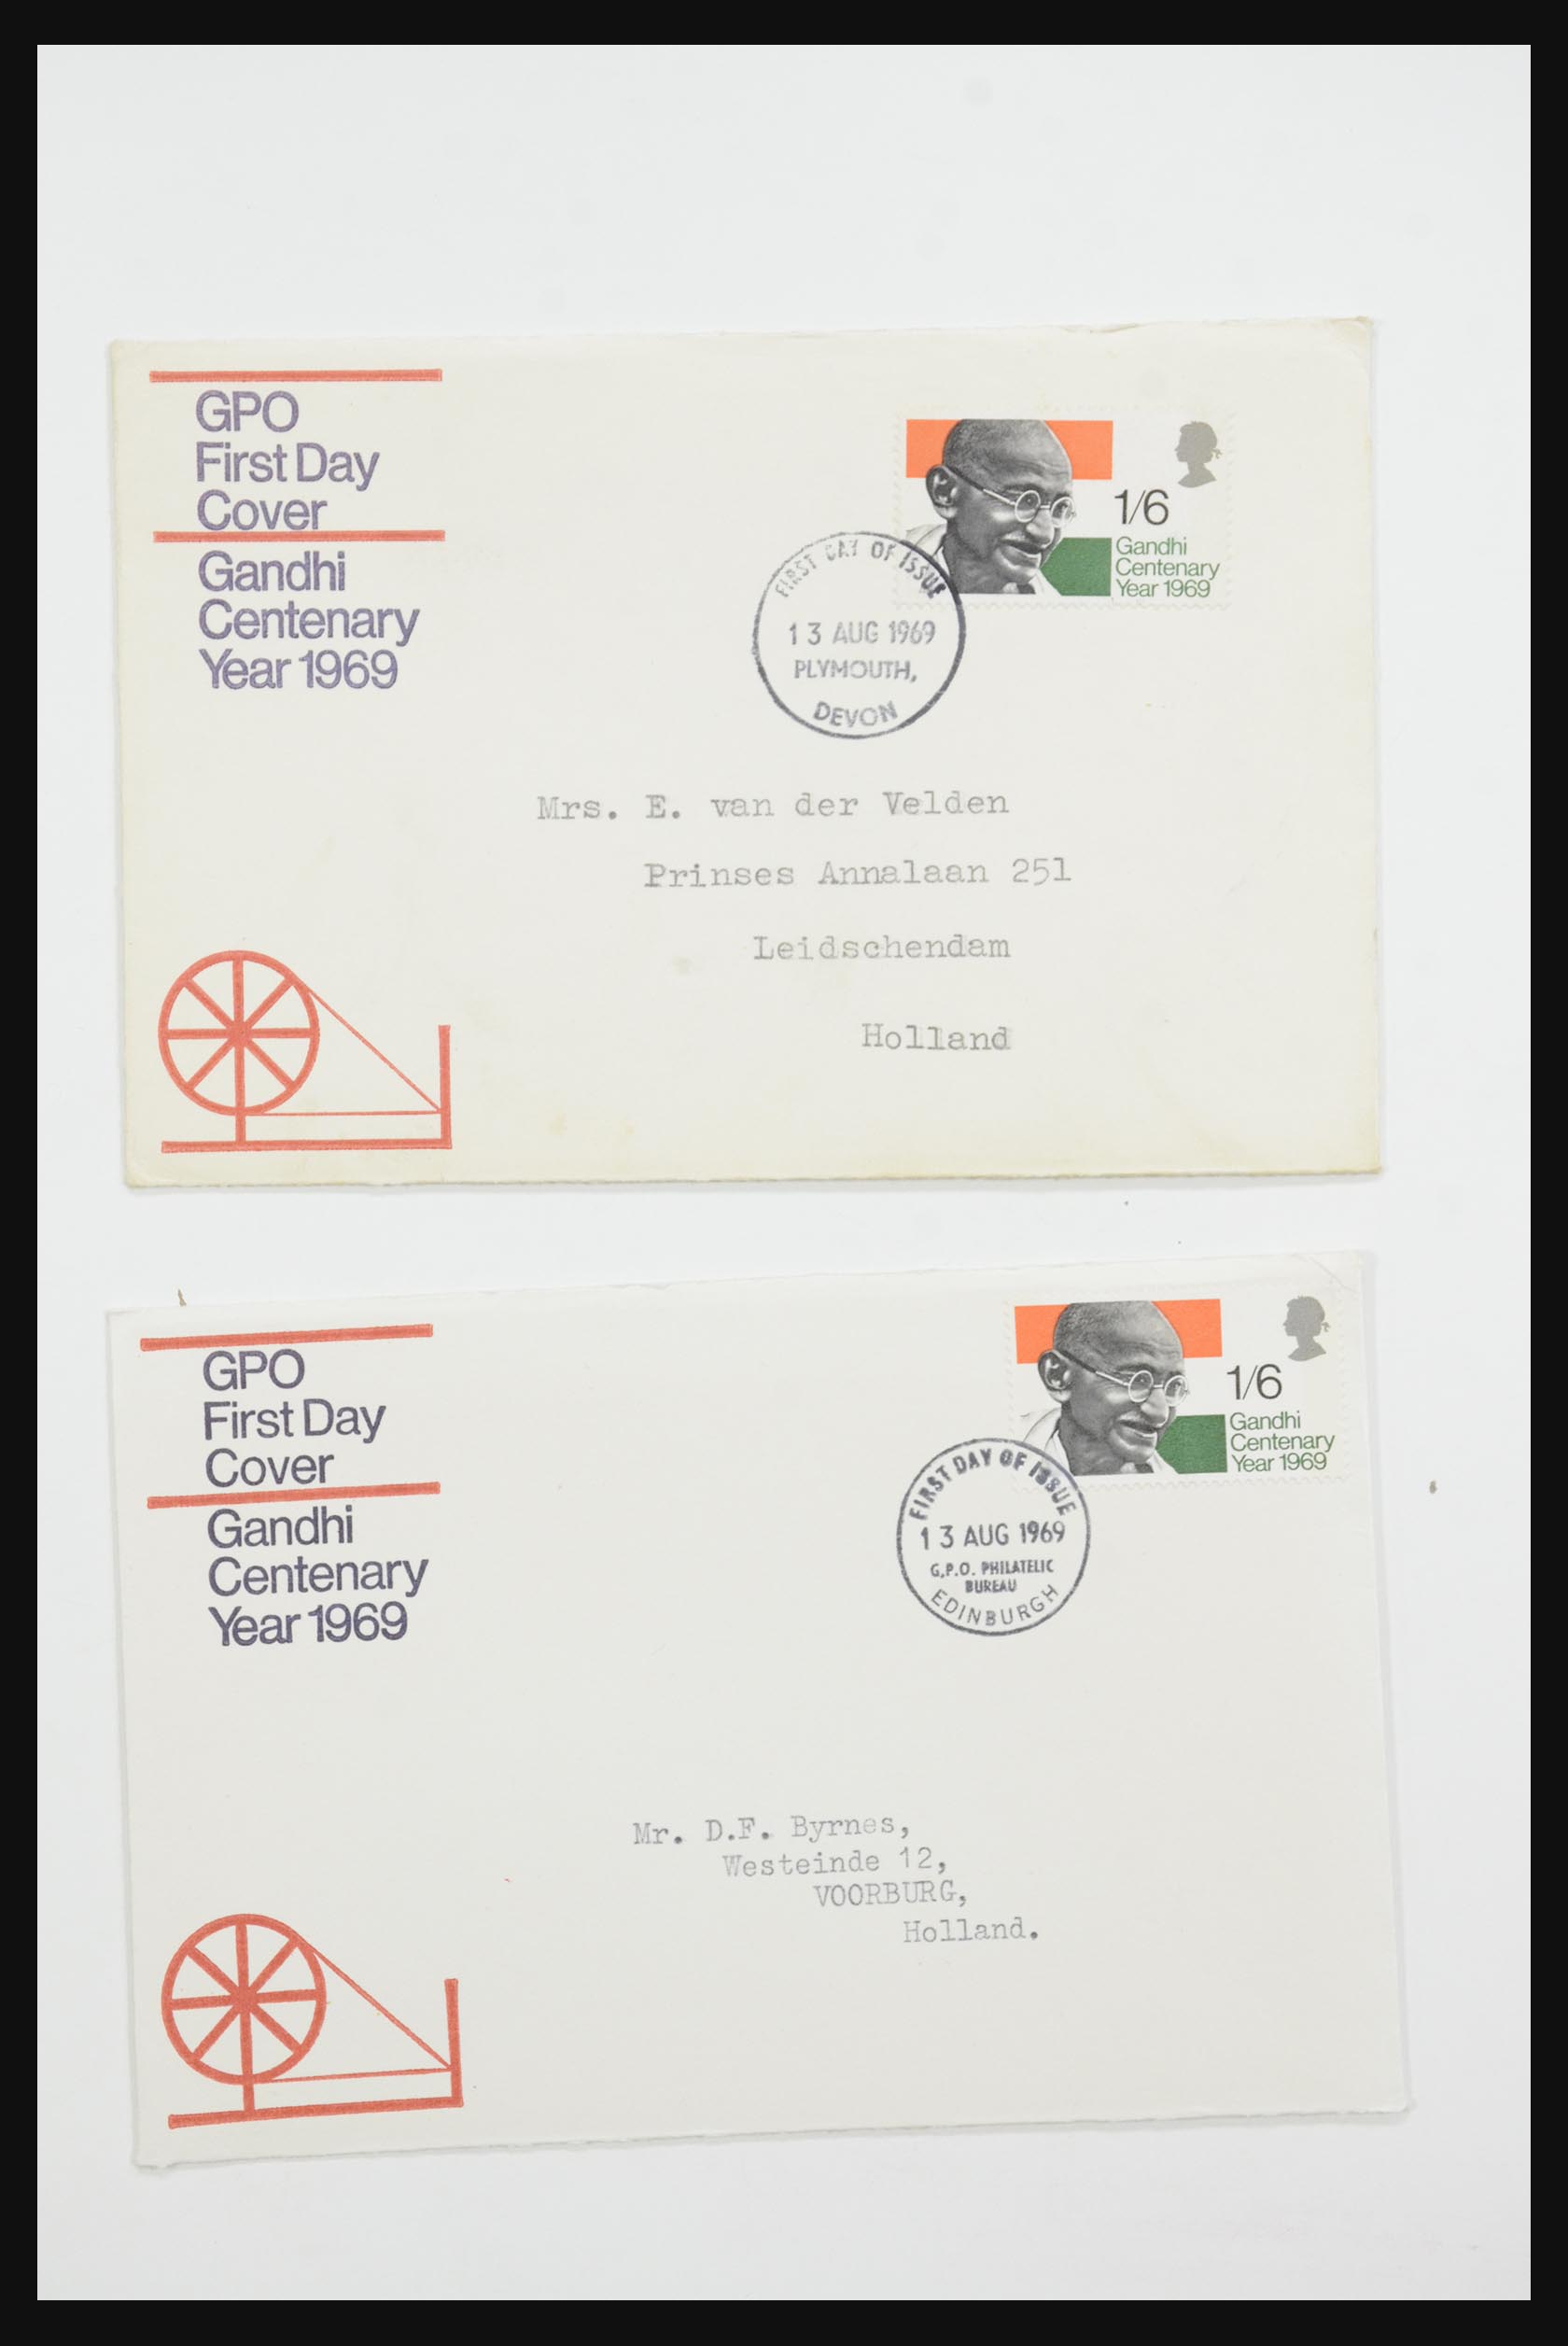 31726 692 - 31726 Great Britain and colonies covers and FDC's 1937-2001.